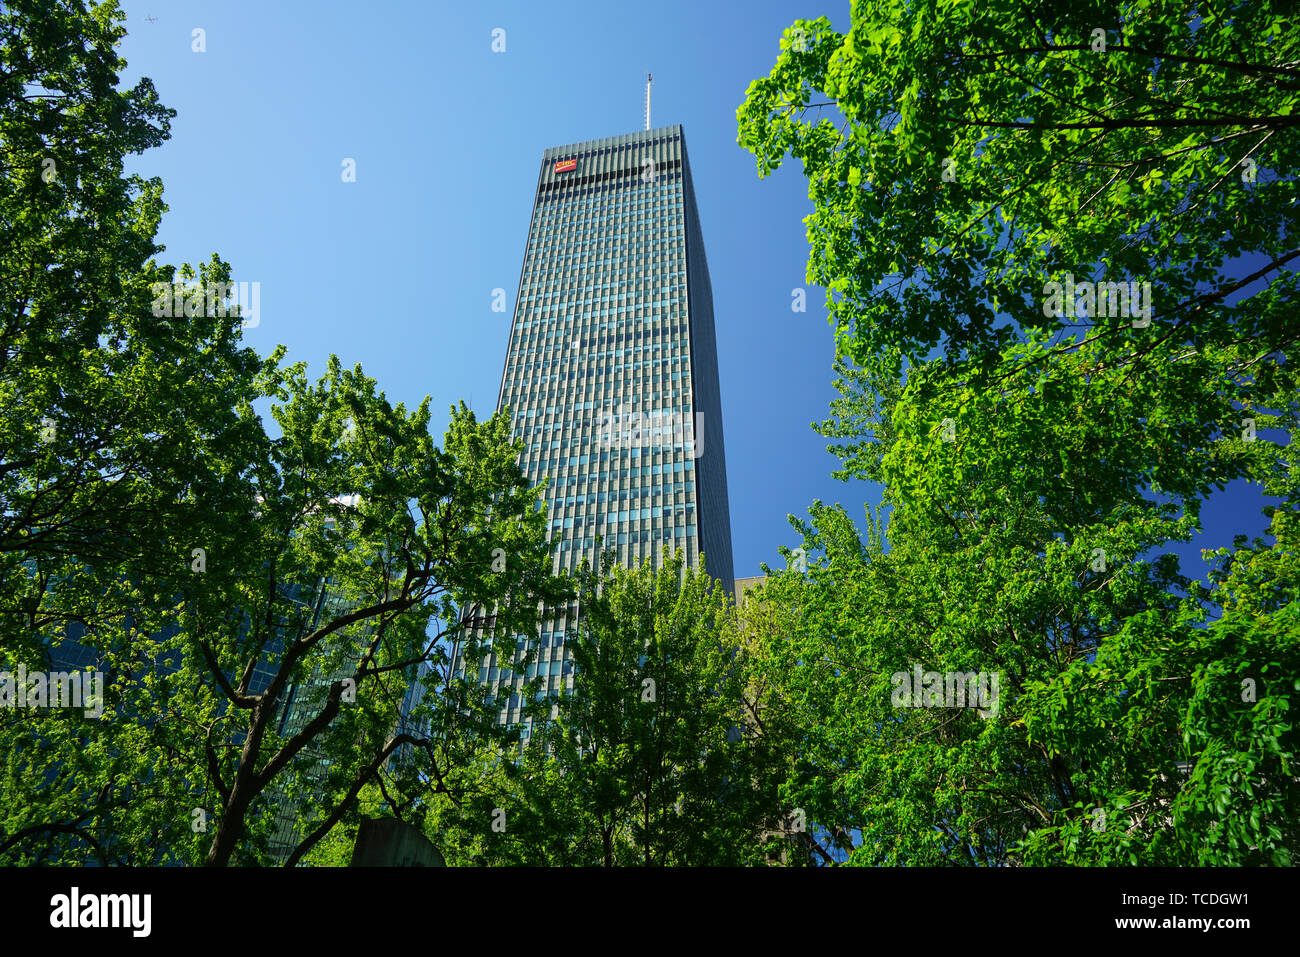 Montreal, Canada,June 6, 2019.CIBC building peeking out from trees in public park.Montreal,Quebec,Canada.Credit:Mario Beauregard/Alamy Live News Stock Photo